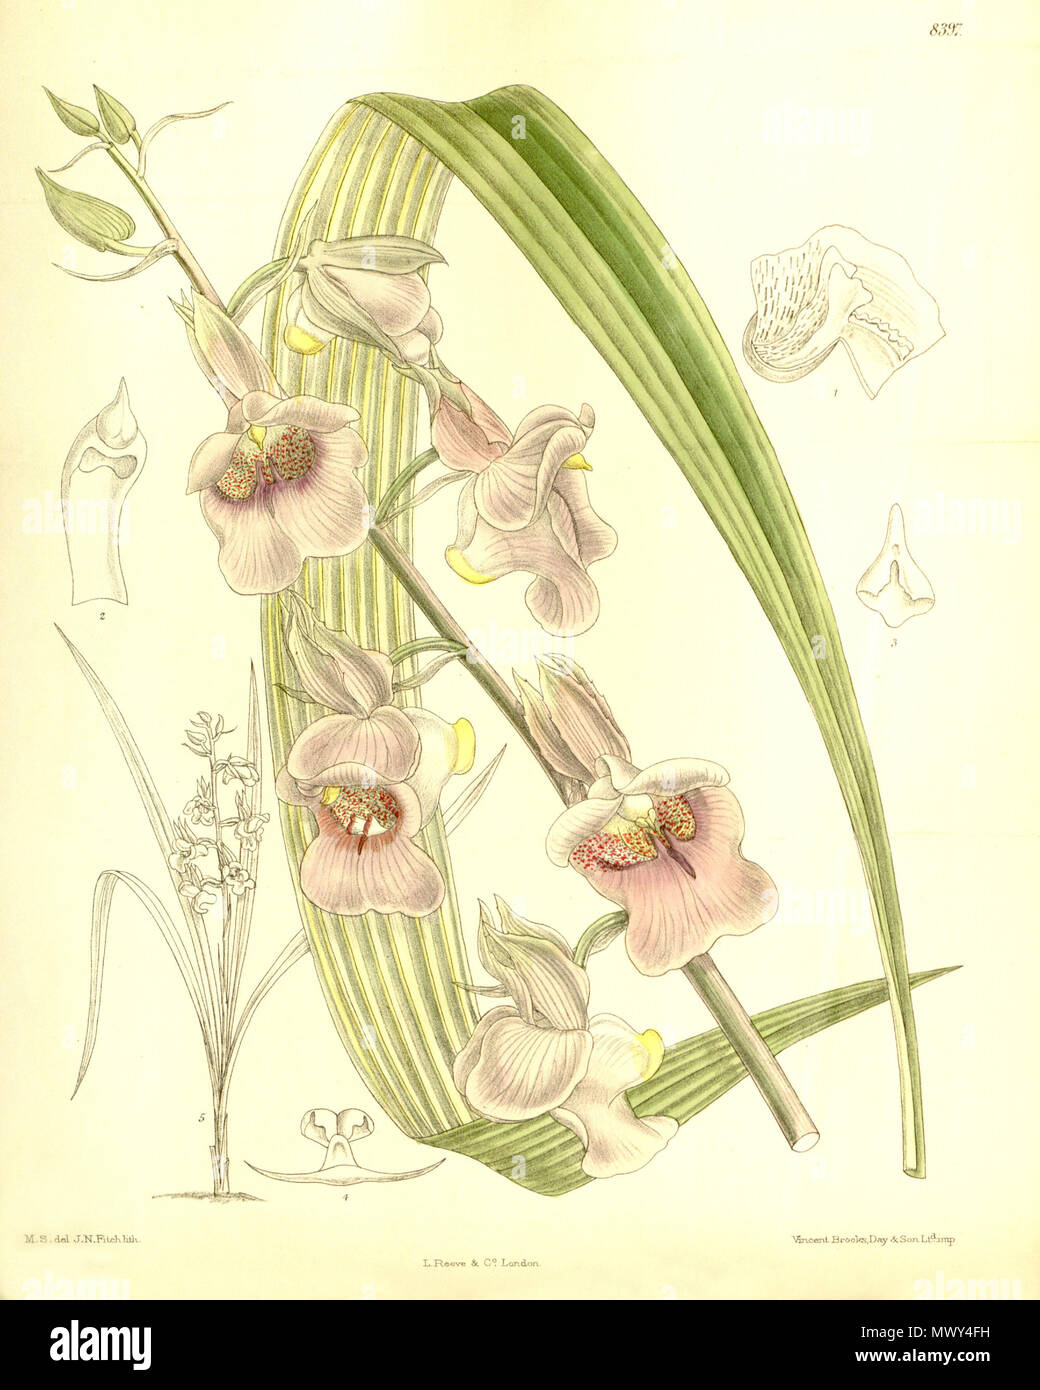 . Illustration of Eulophia cucullata (as syn. Lissochilus stylites) . 1911. M. S. del. ( = Matilda Smith, 1854-1926), J. N. Fitch lith. ( = John Nugent Fitch, 1840–1927) Description by R. A. Rolfe (1855–1921) 199 Eulophia cucullata (as Lissochilus stylites) - Curtis' 137 (Ser. 4 no. 7) pl. 8397 (1911) Stock Photo